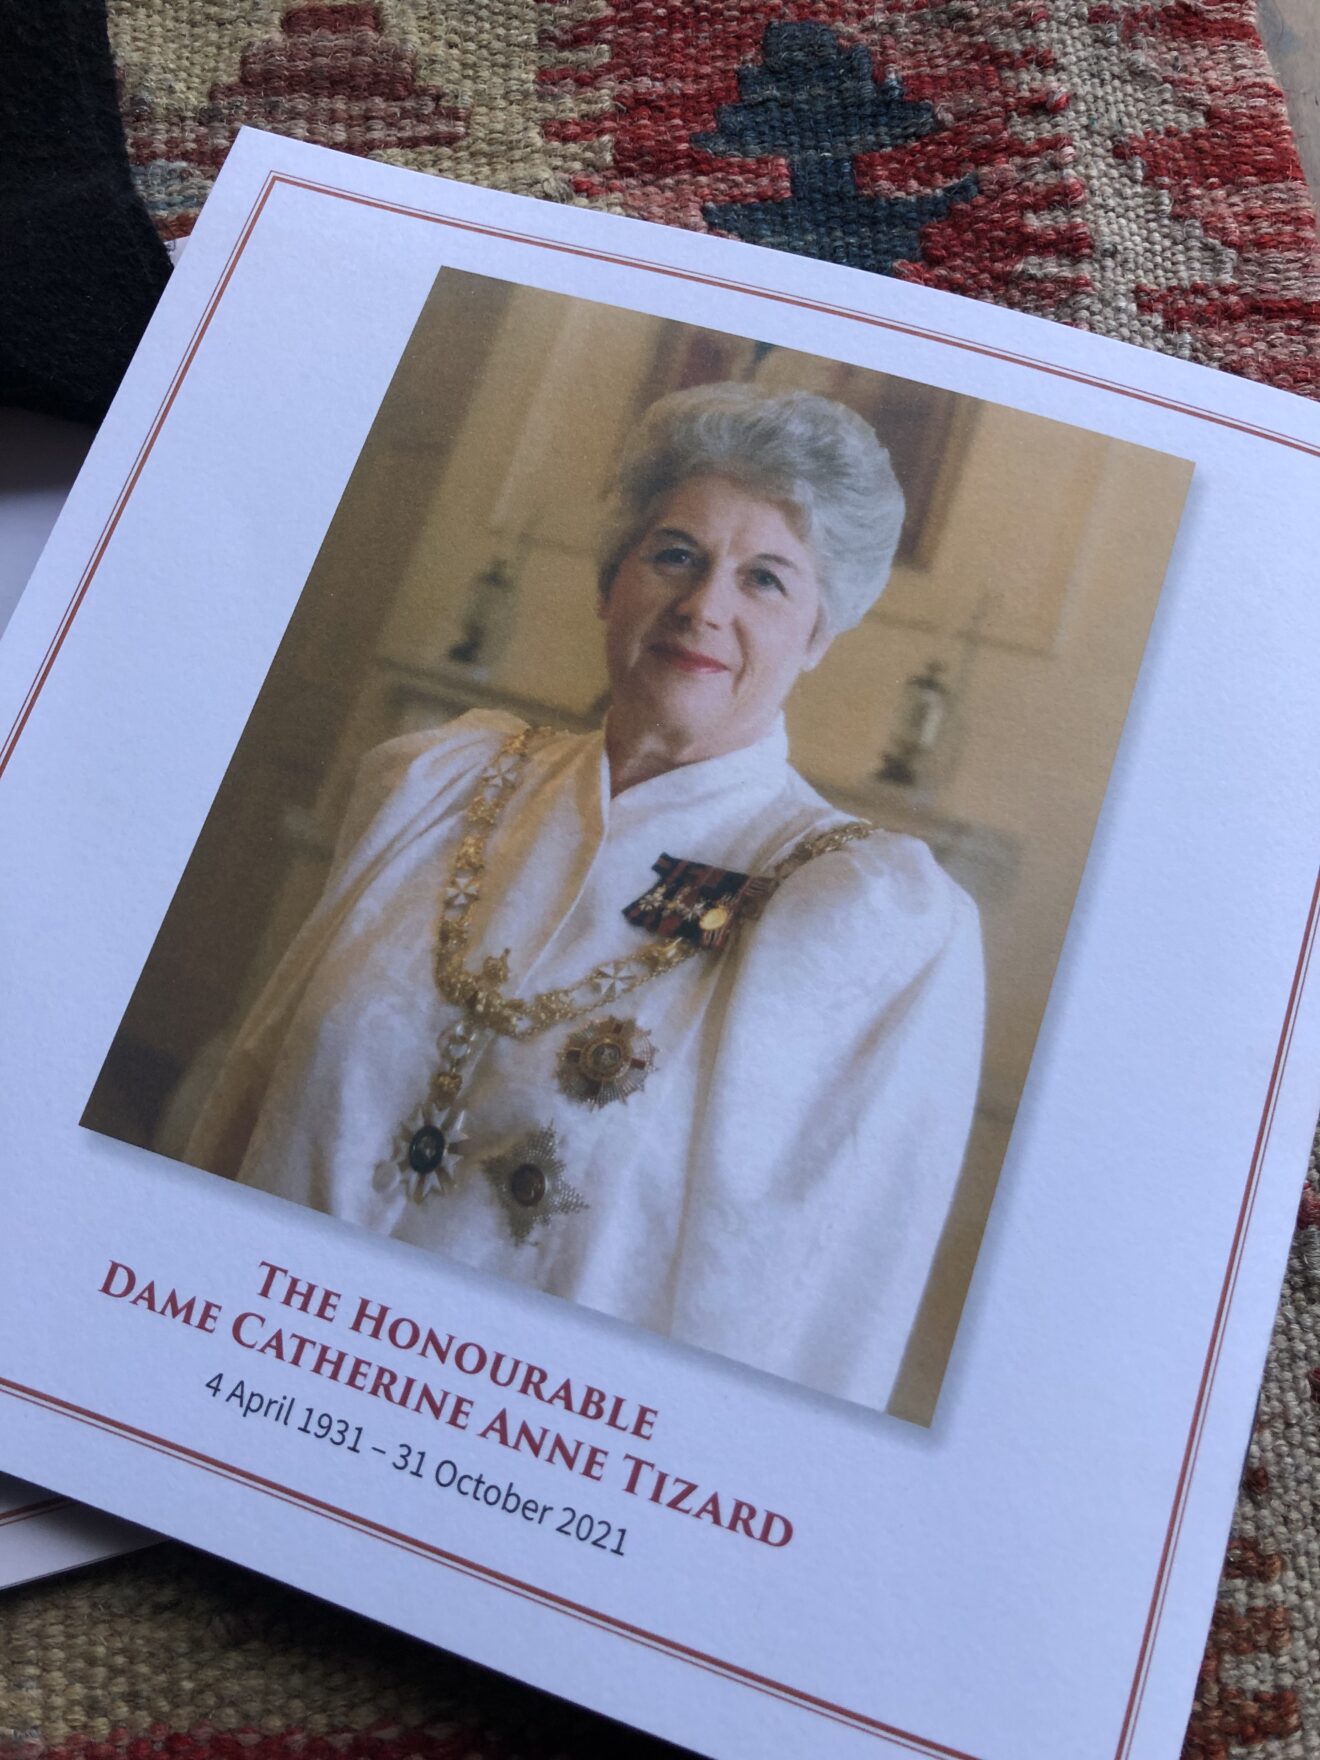 State Memorial & Concert of The Honourable Dame Catherine Tizard